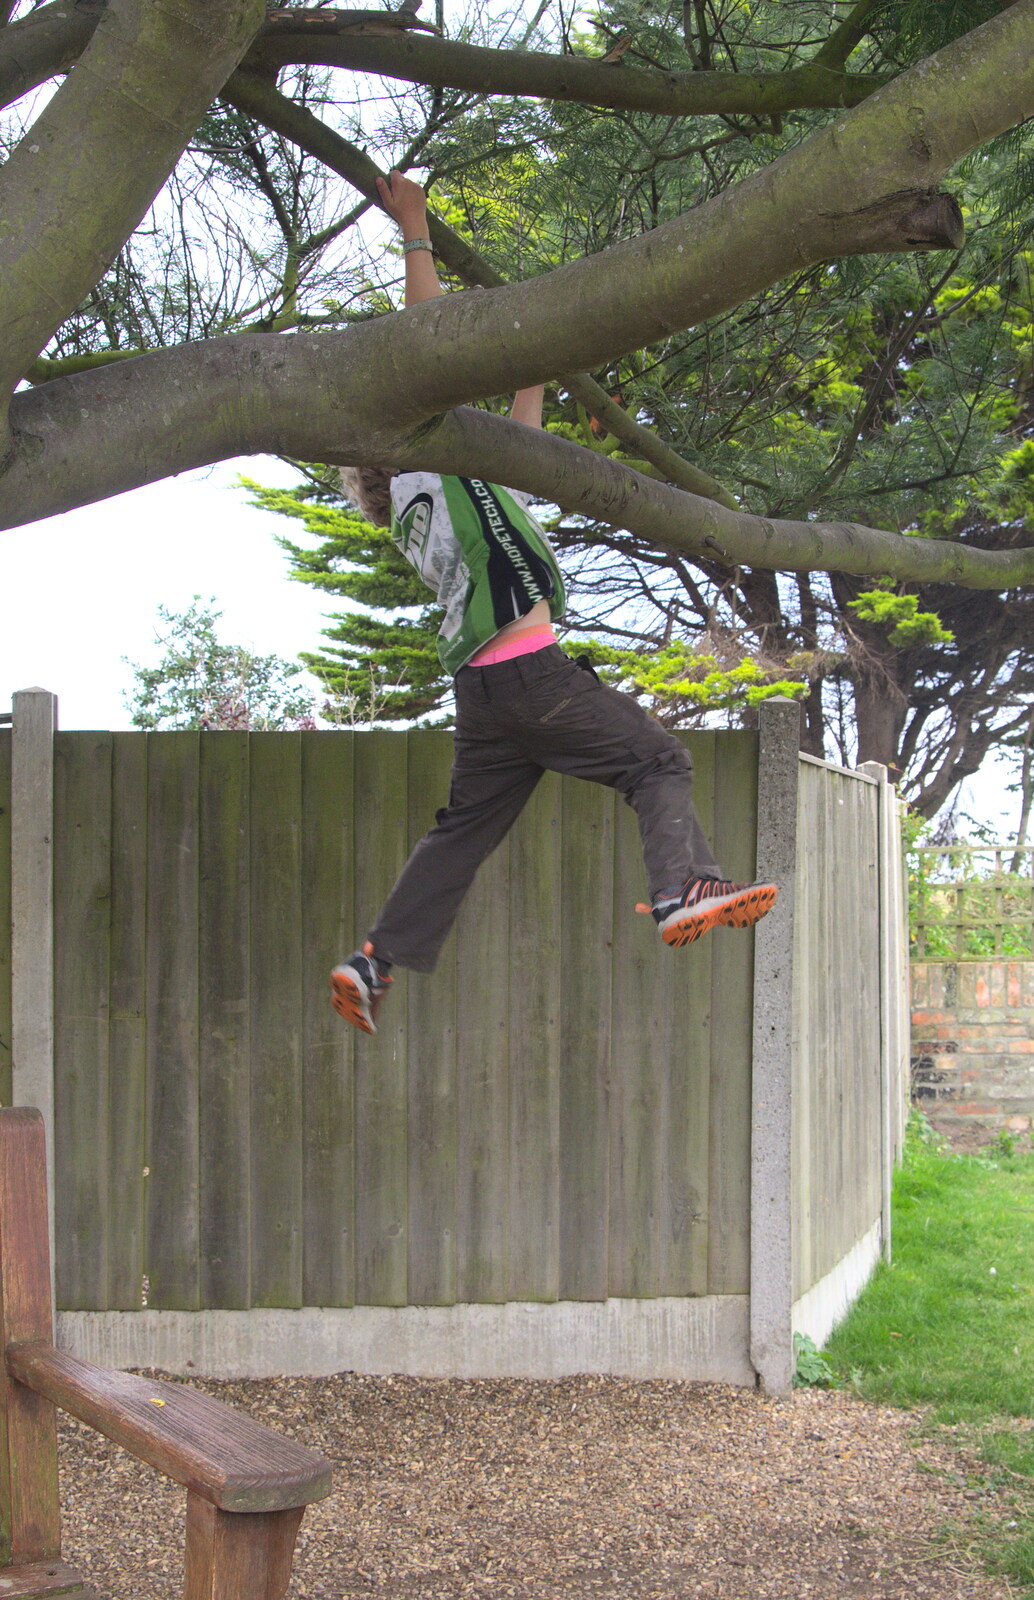 Fred finds a new way to get down from the tree from The Danger of Trees: A Camping (Mis)adventure - Southwold, Suffolk - 3rd August 2015